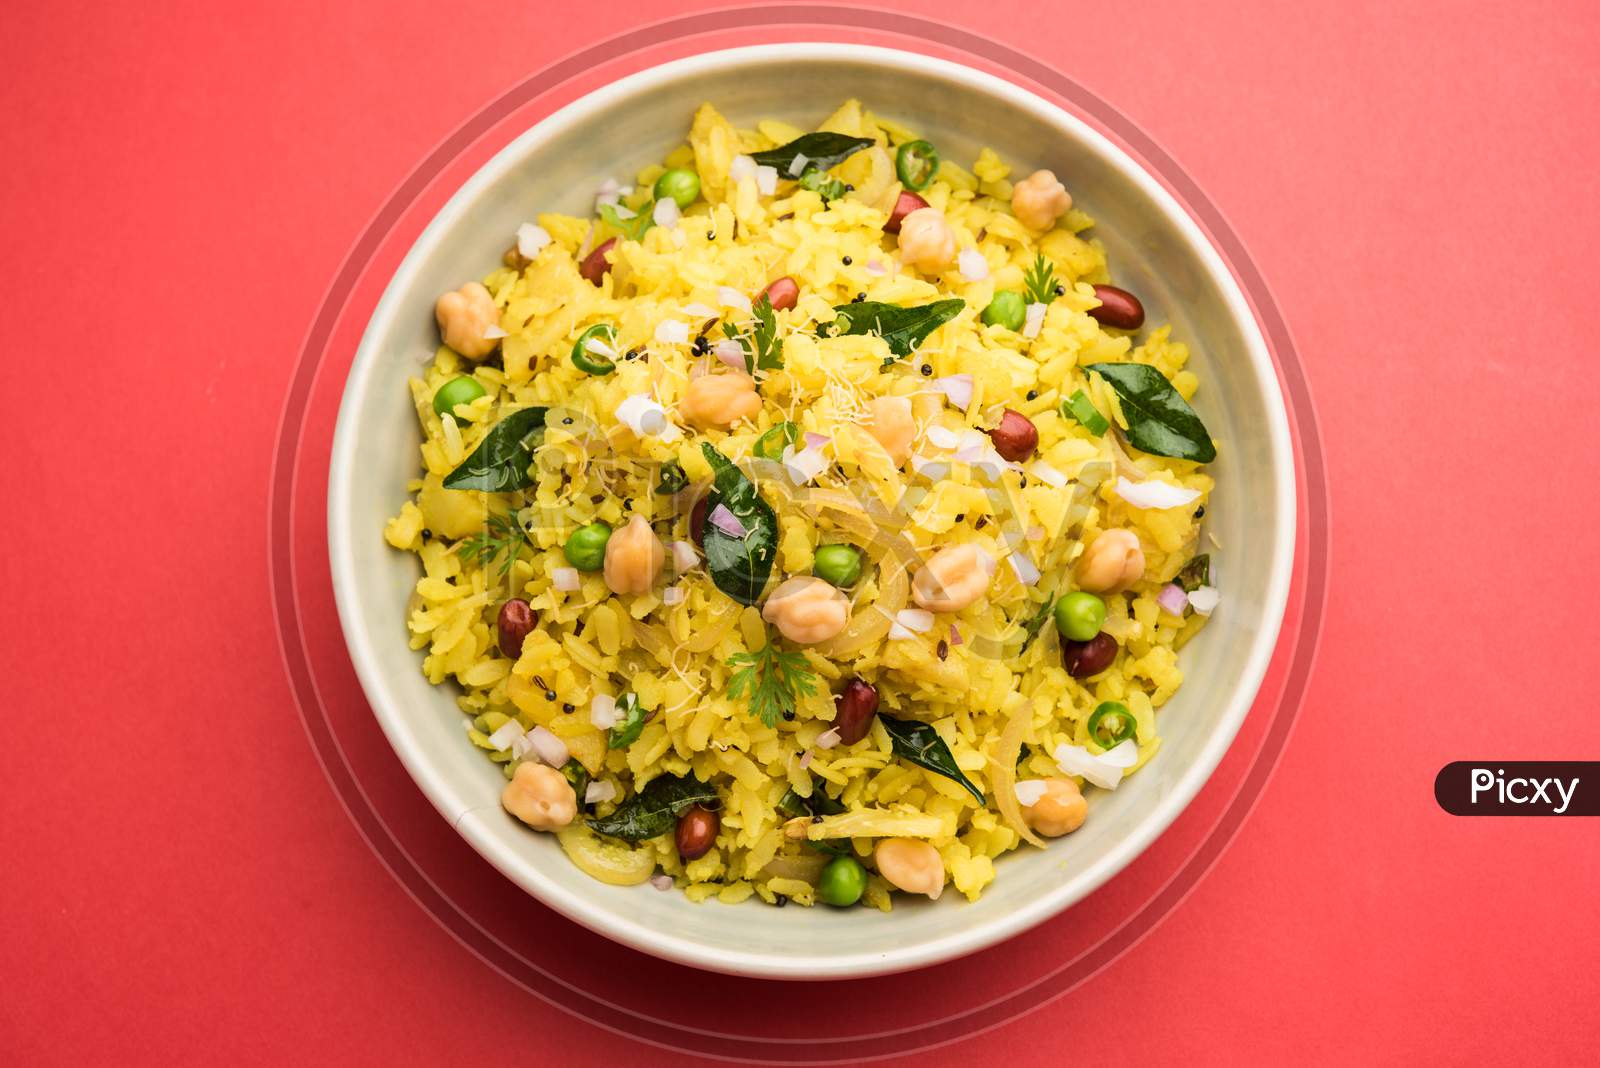 Chana Poha Or Chickpea Pohe Is A Protein Rich Breakfast Recipe From India